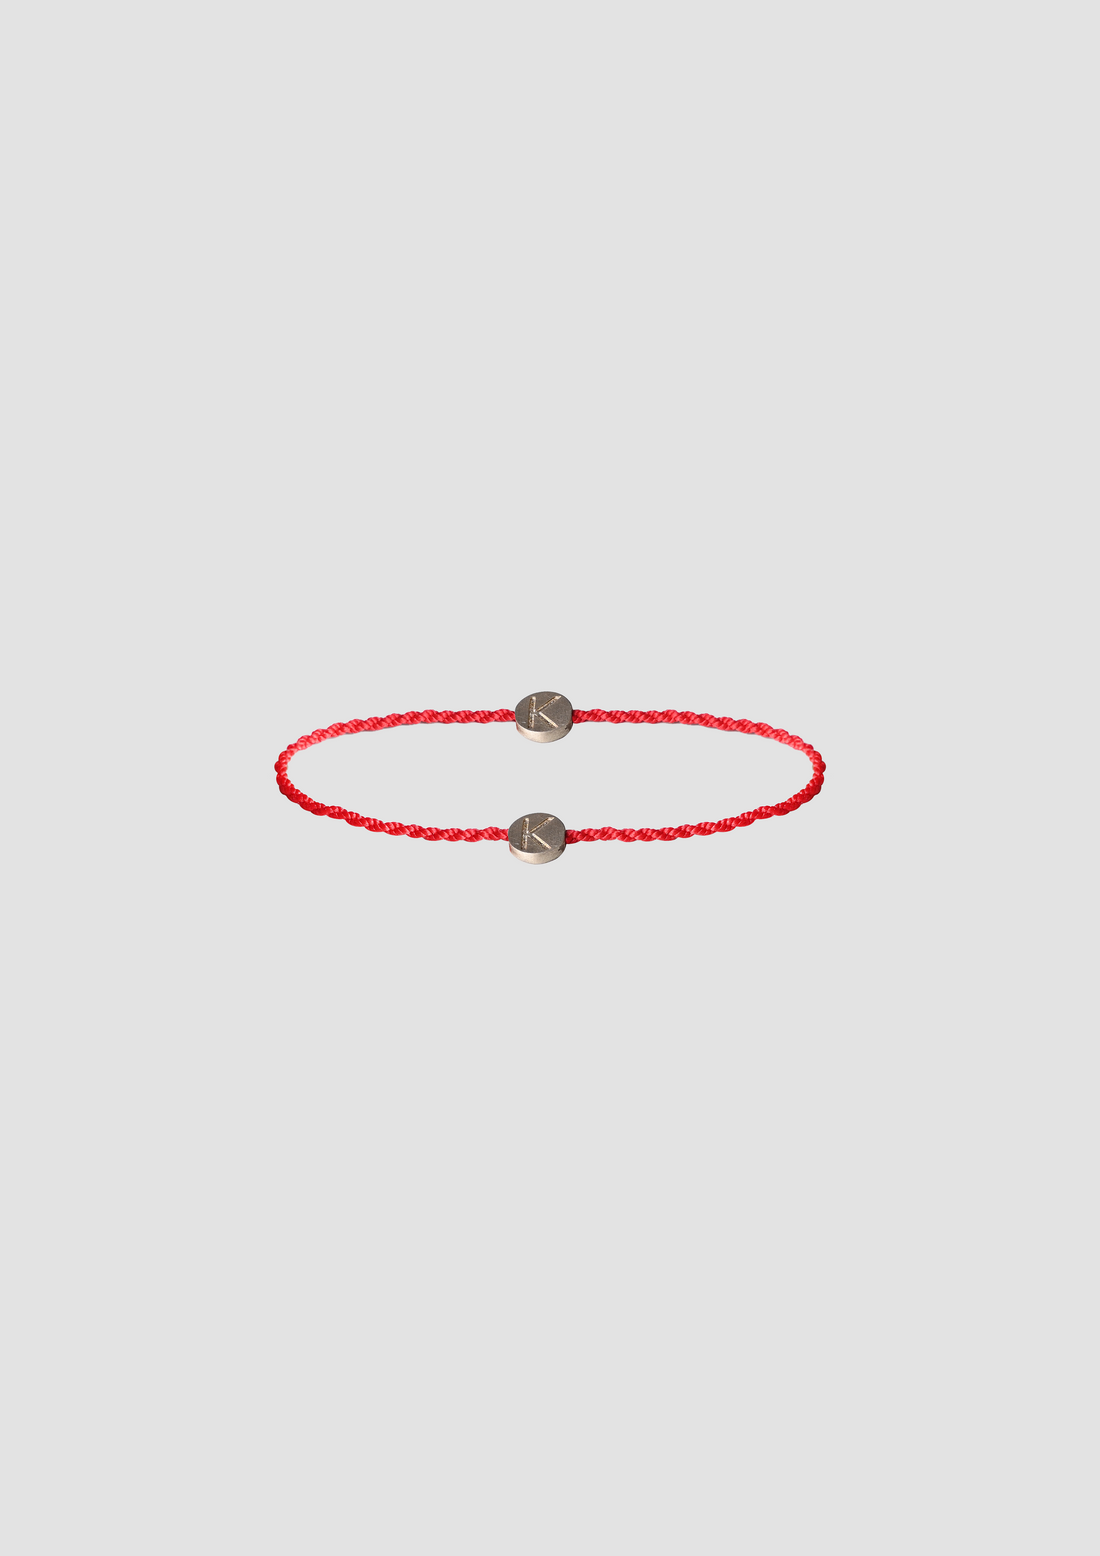 Moon Bracelet in Silver and Cord in Red